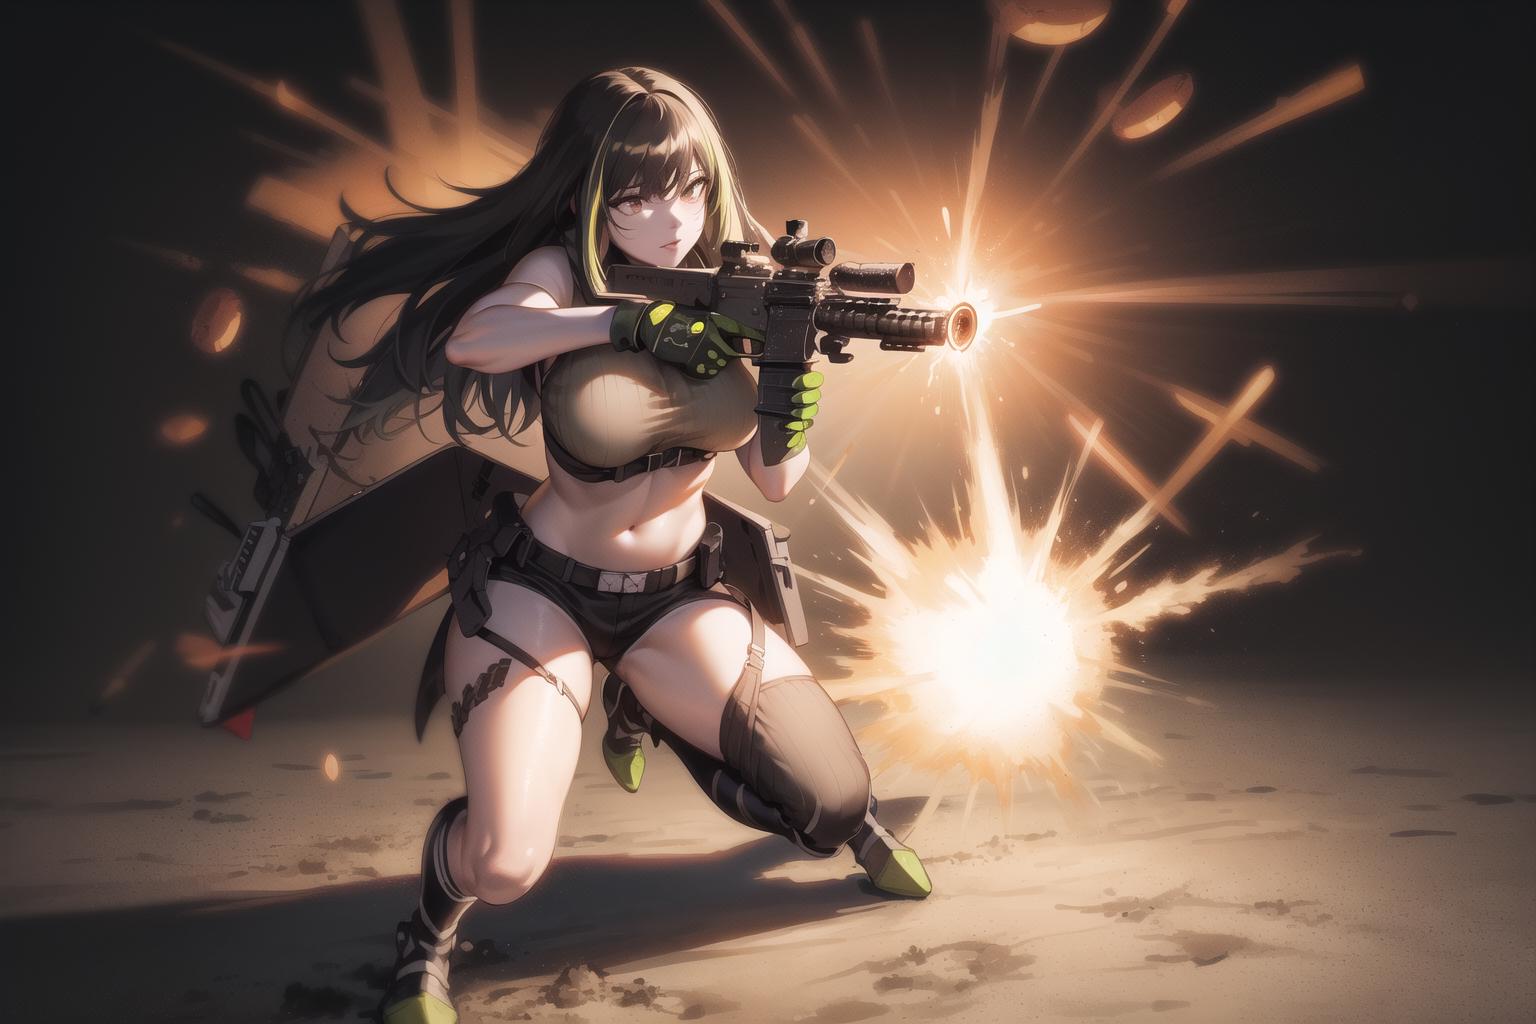 M4a1 | Girls' Frontline image by Tonisk